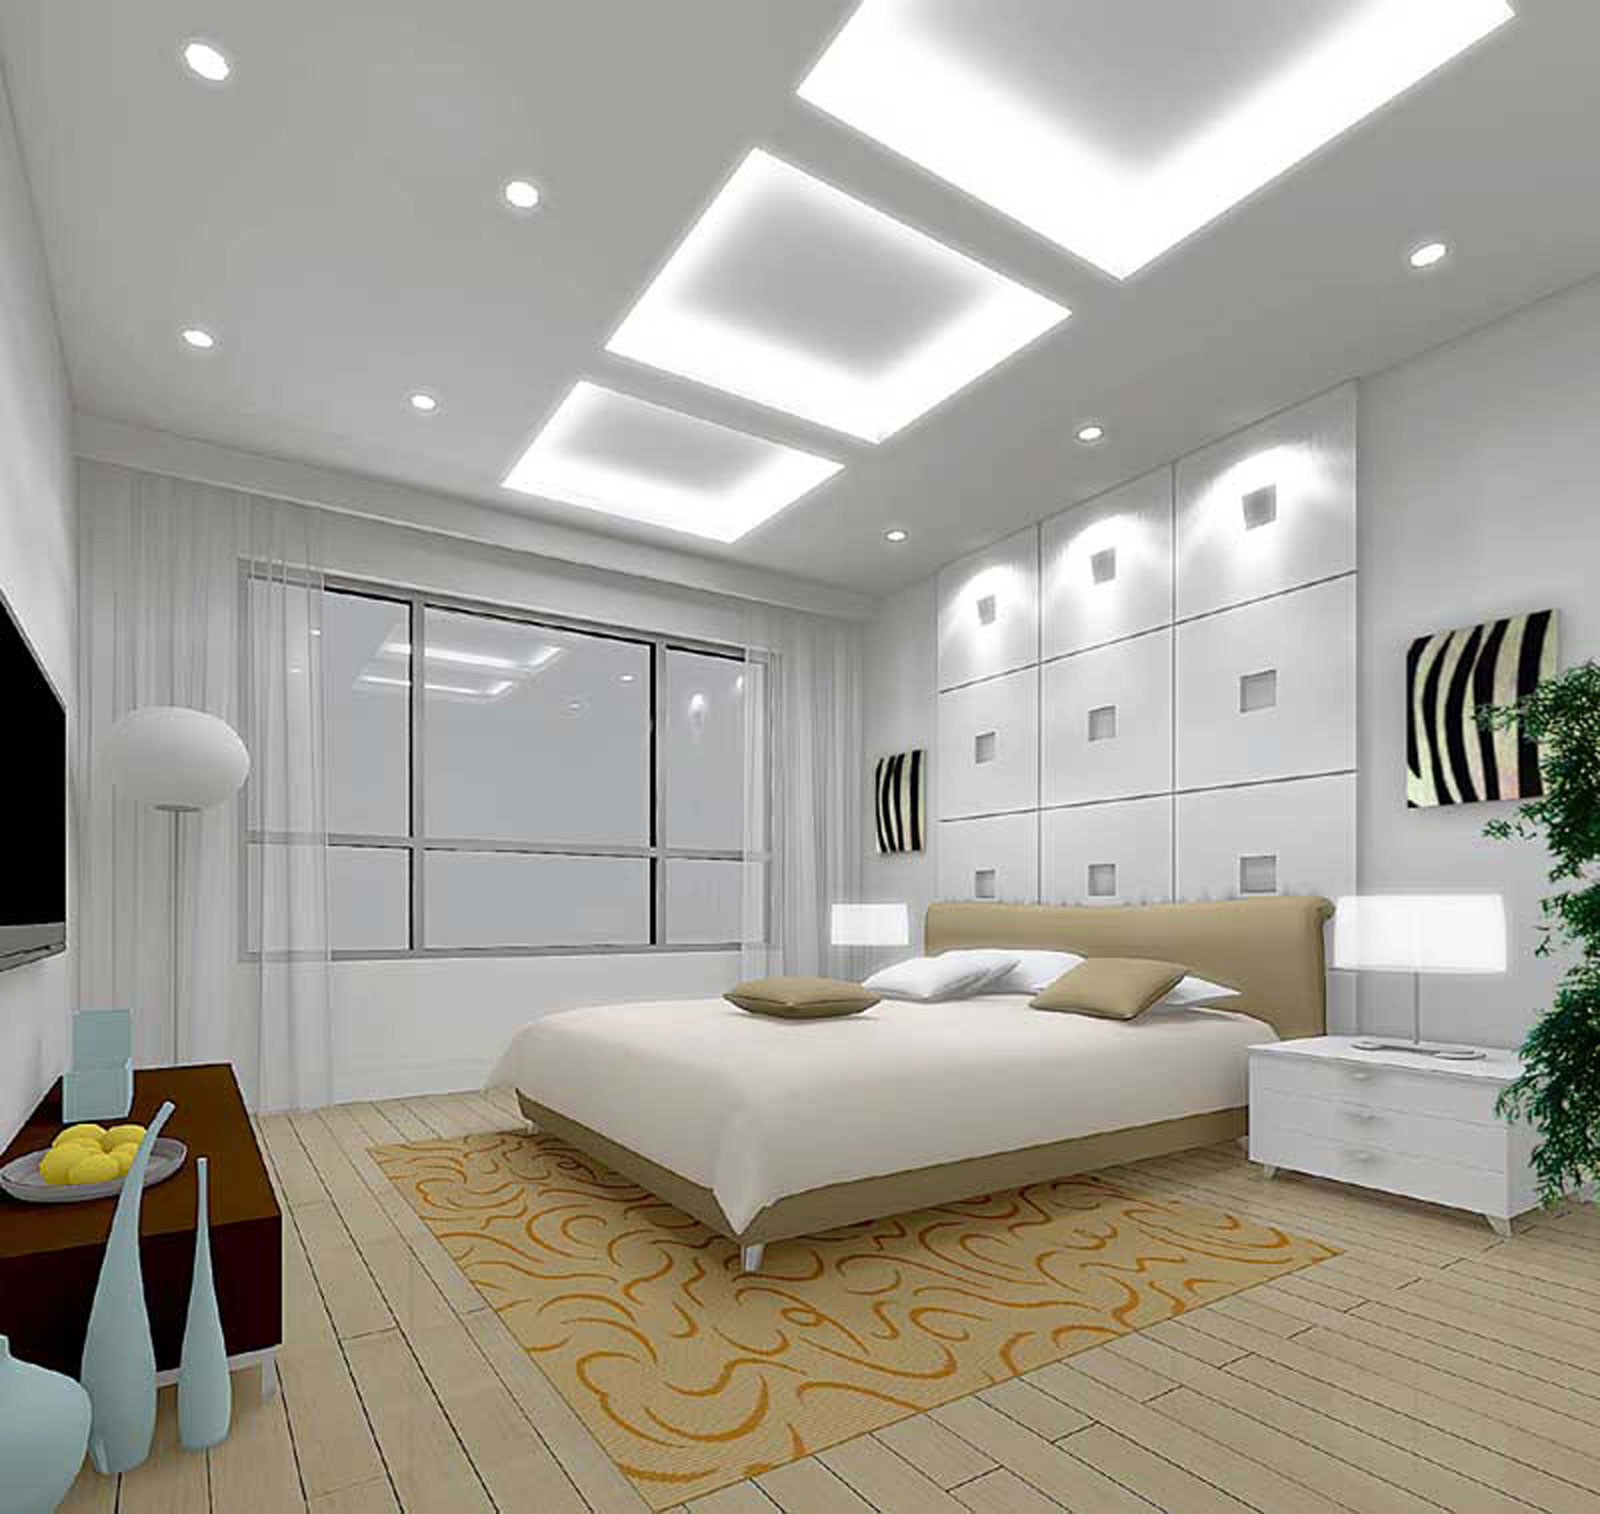 Bedroom Ceiling Soft Fascinating Bedroom Ceiling Lights Brightening Soft Bed Design And Cool Lamp Shade Also Hanging Tv Cabinet Beautiful Bedroom Ceiling Lights Your Stunning Home Needs